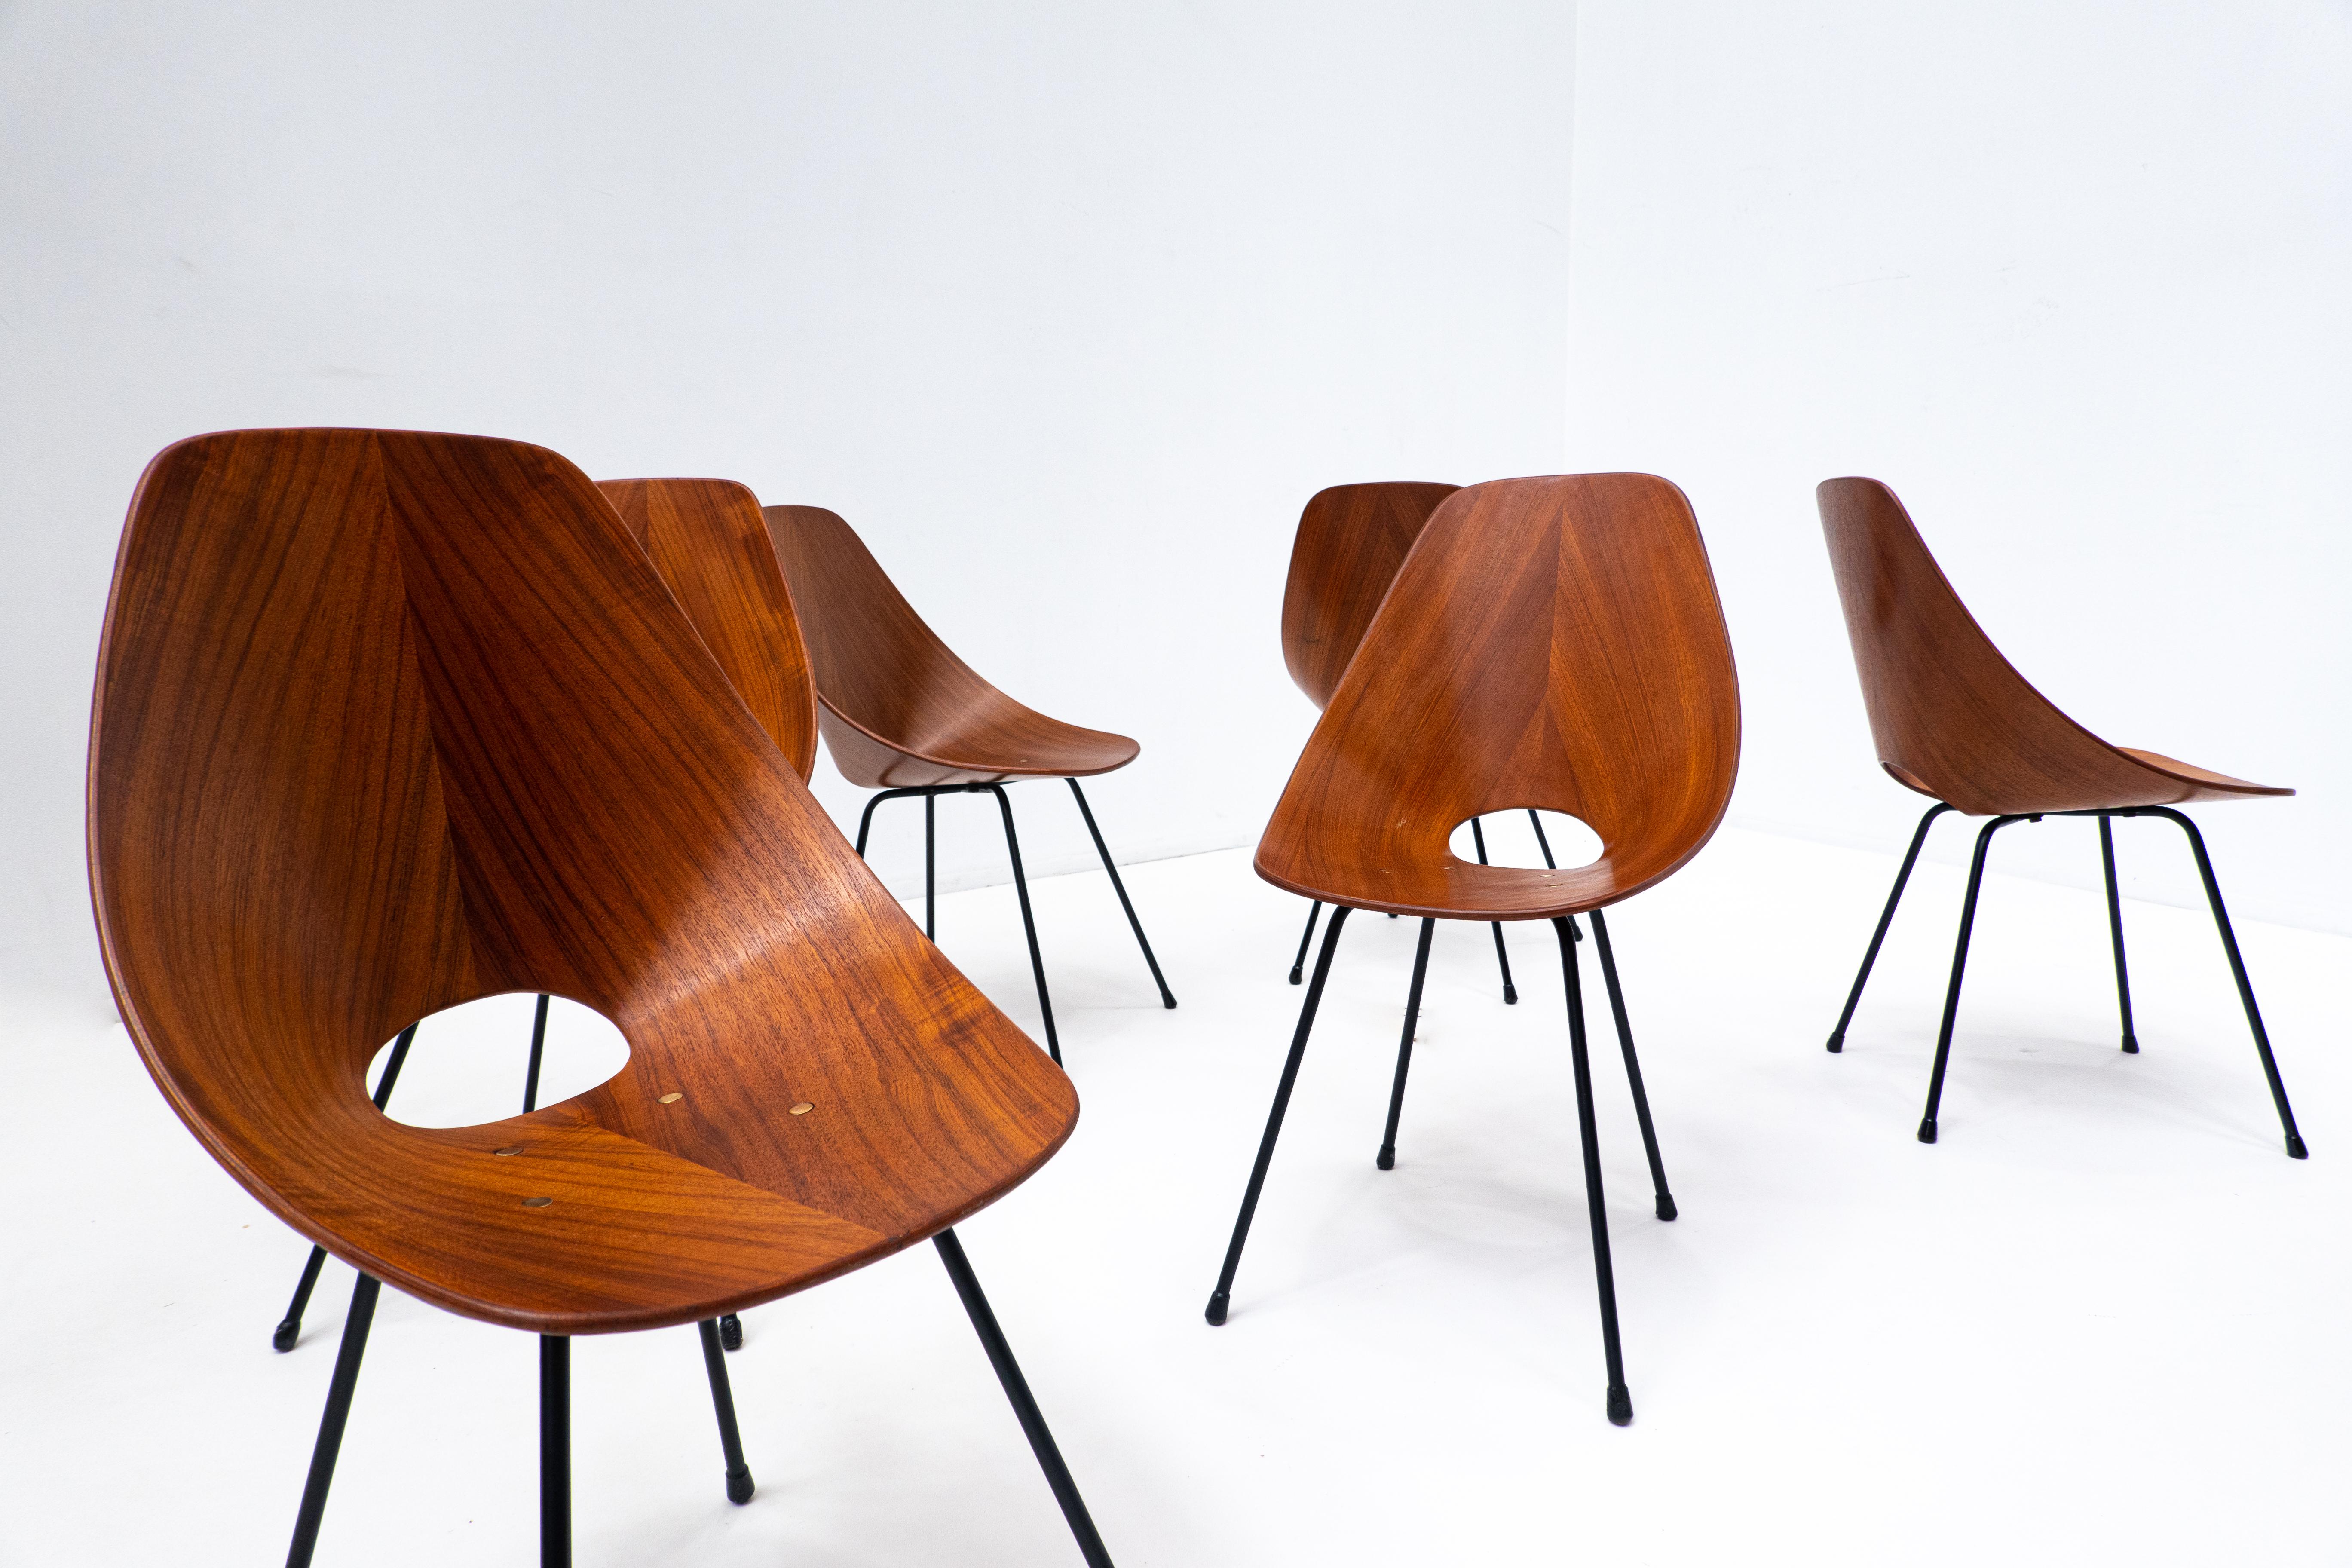 Wood Set of 6 Mid-Century Chairs by Vittorio Nobili for Fratelli Tagliabue, Italy